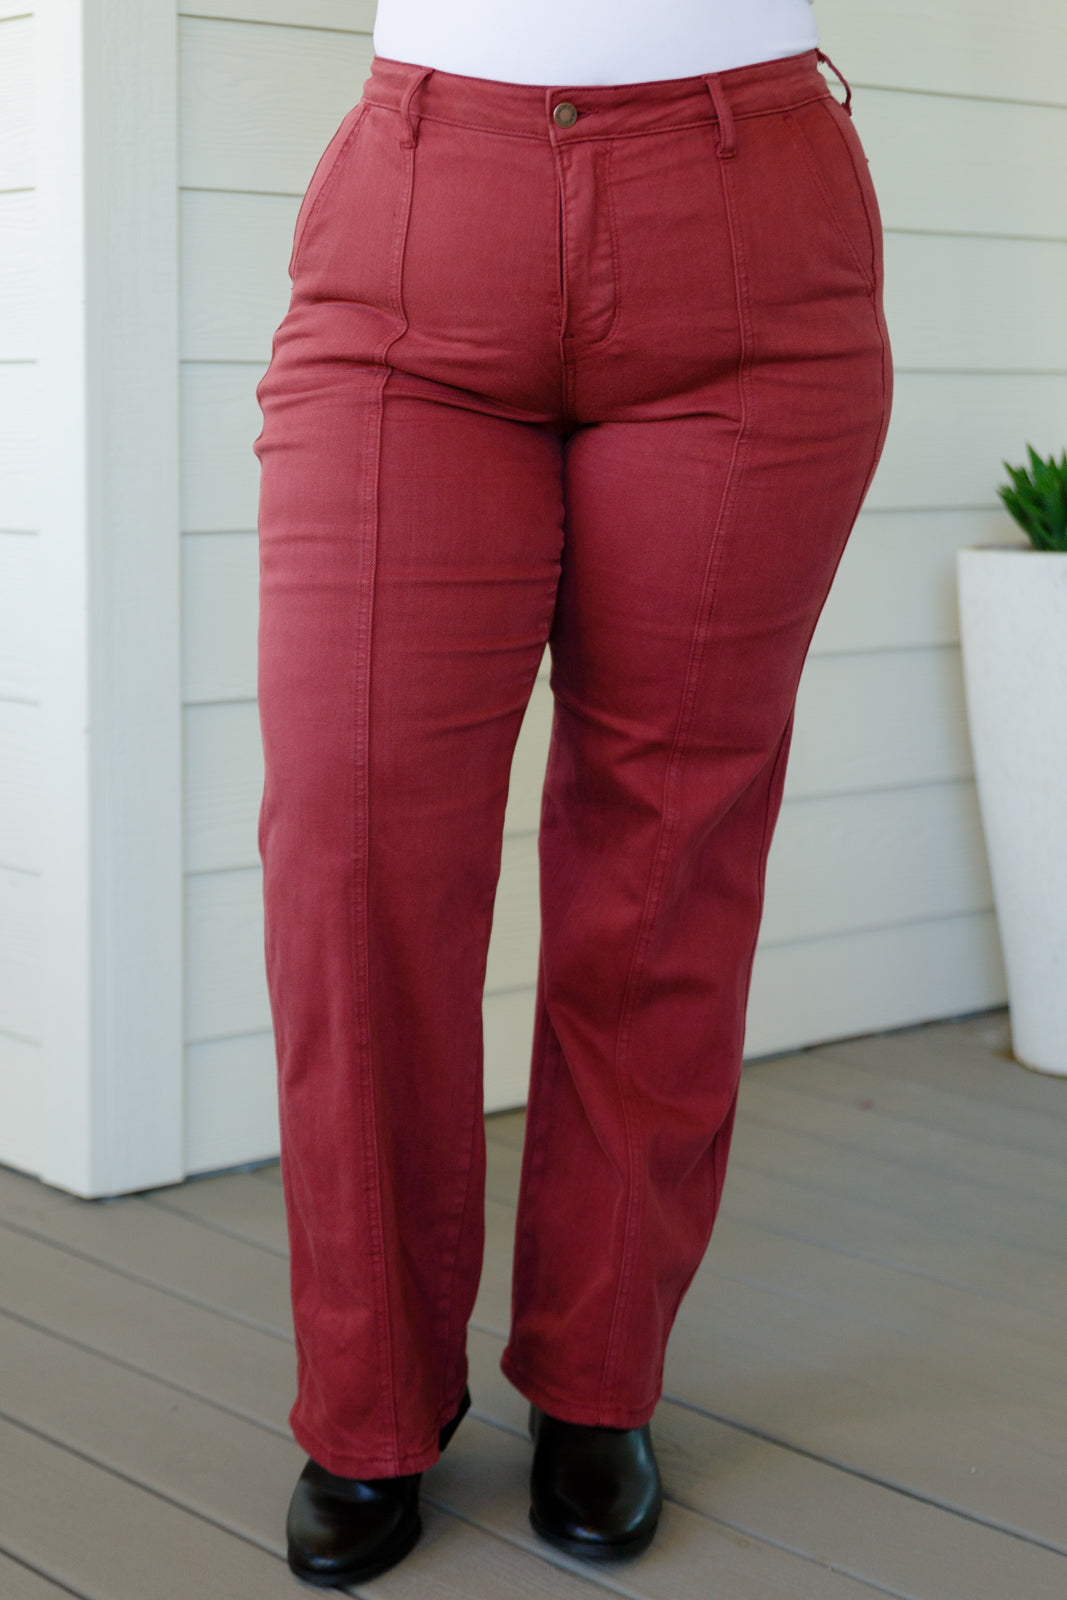 High Rise Front Seam Straight Judy Blue Jeans in Burgundy